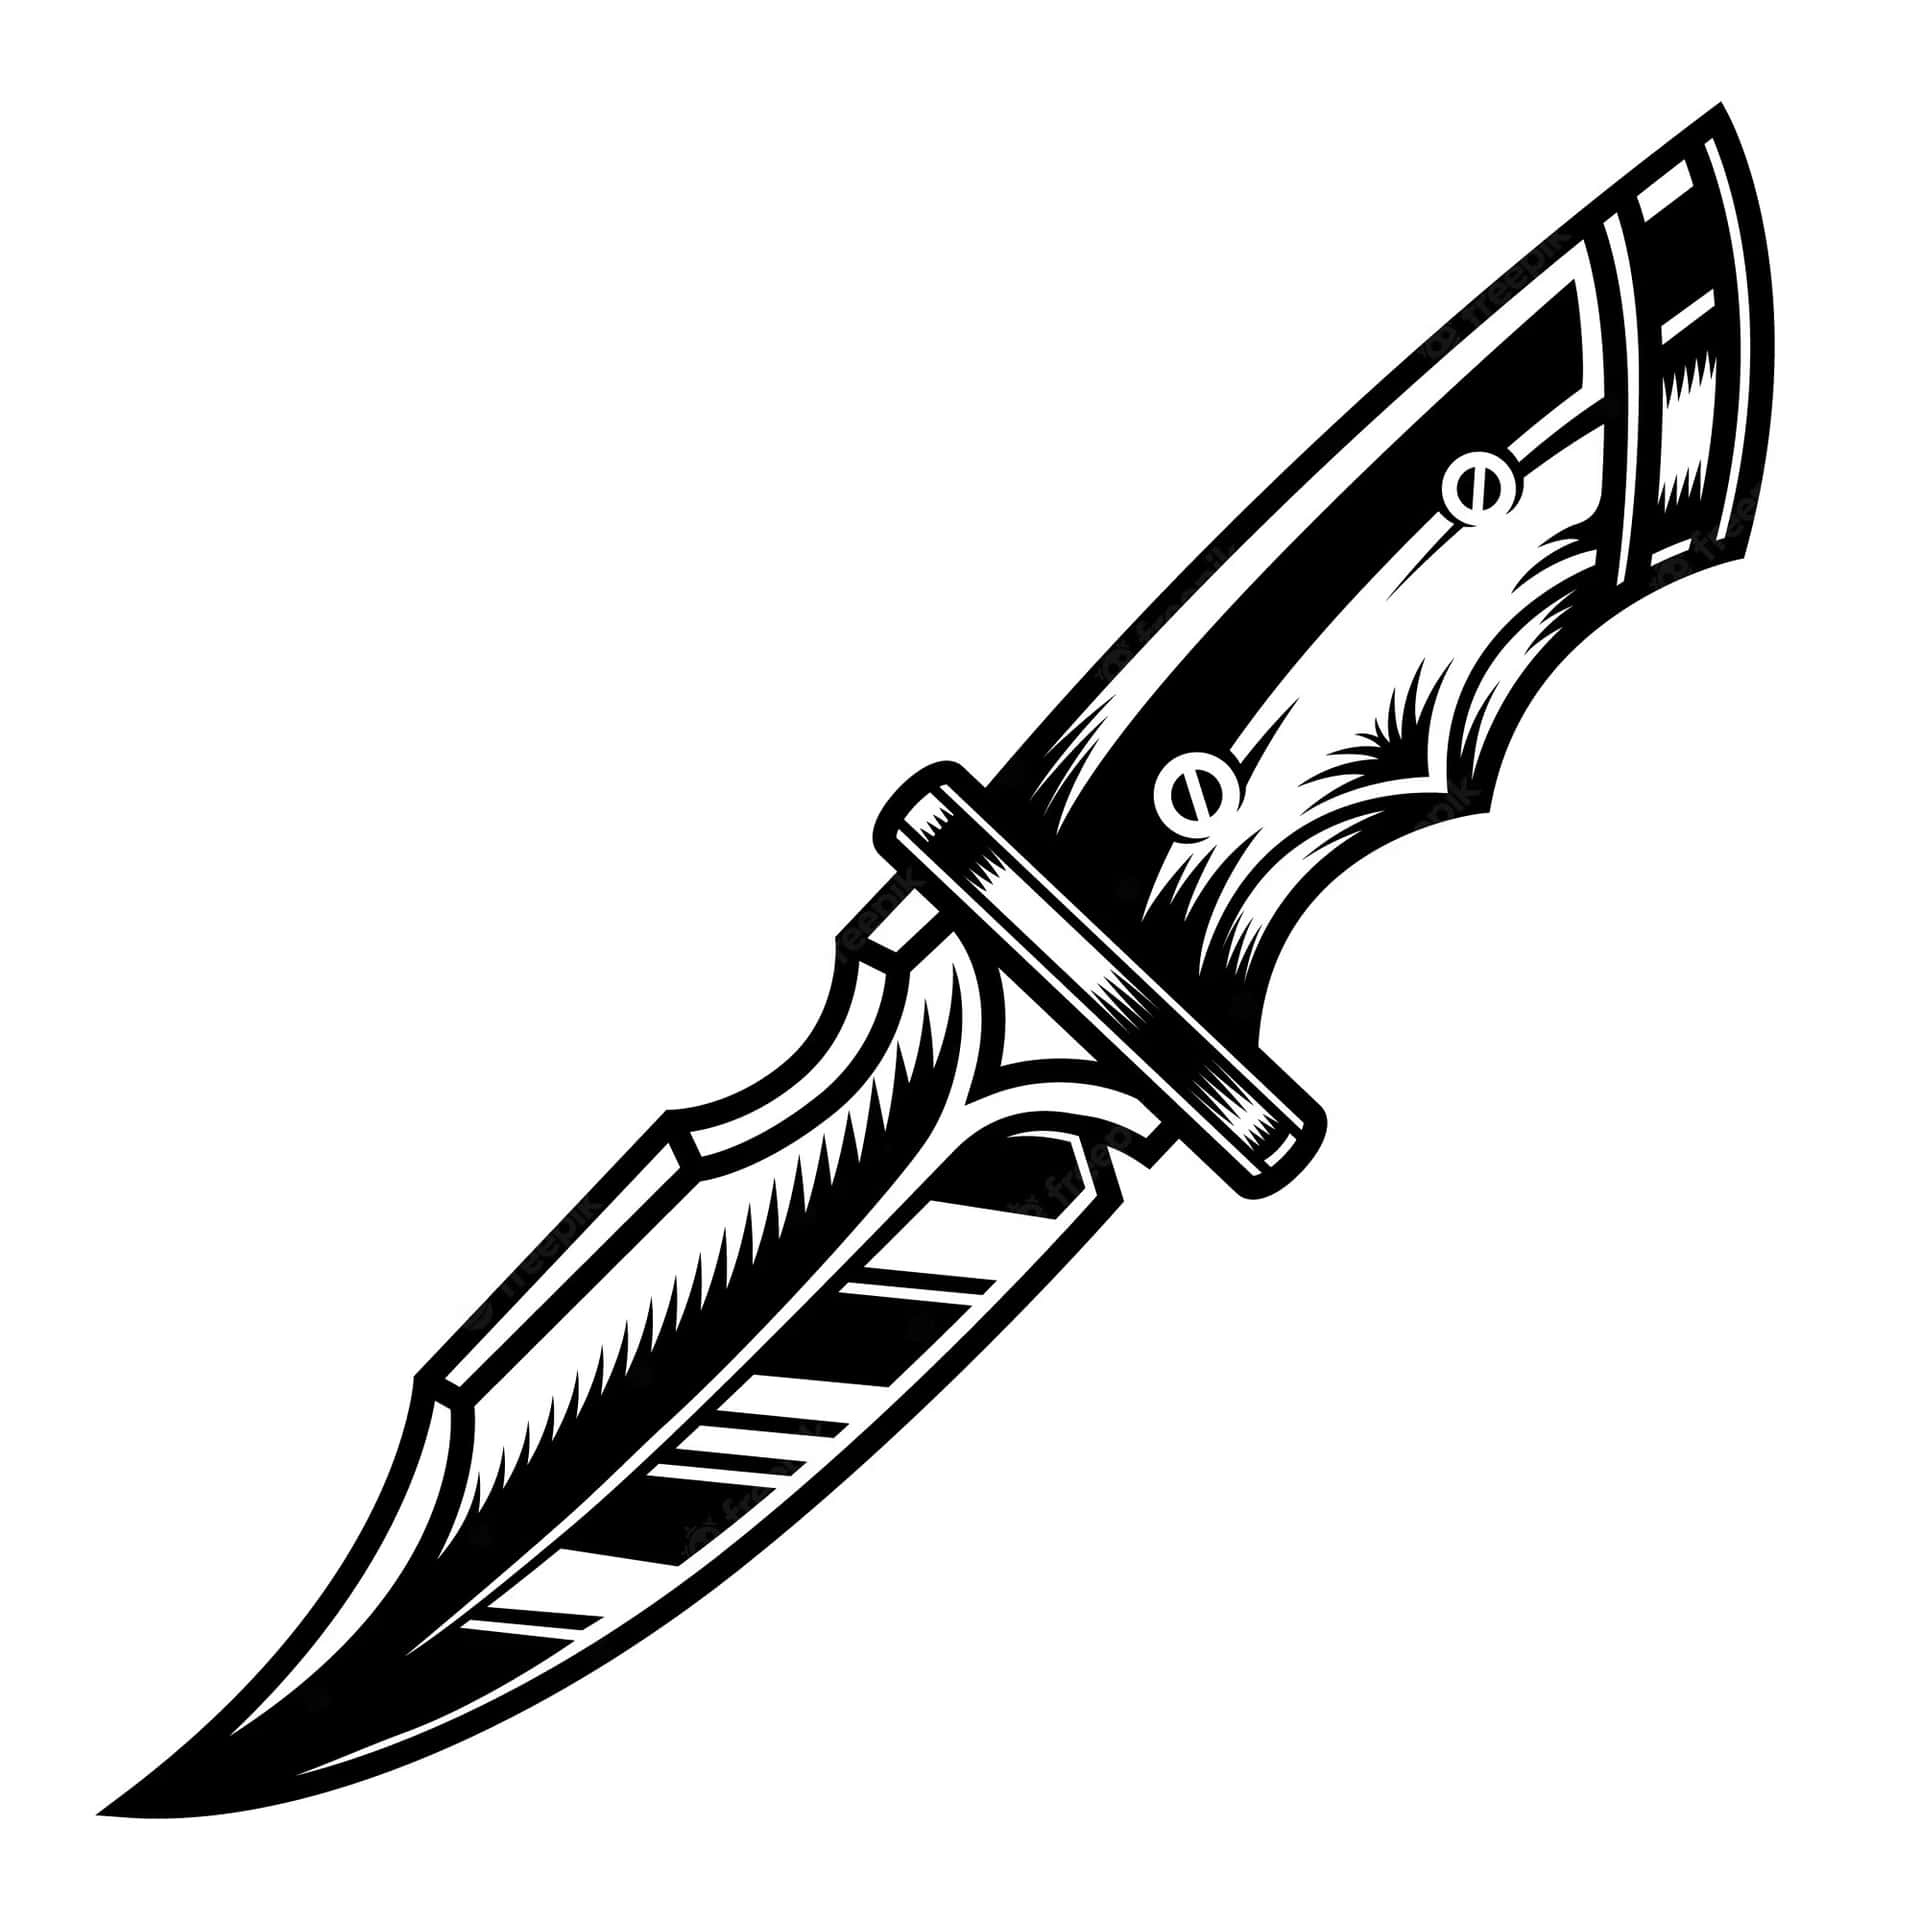 A Knife In Black And White On A White Background